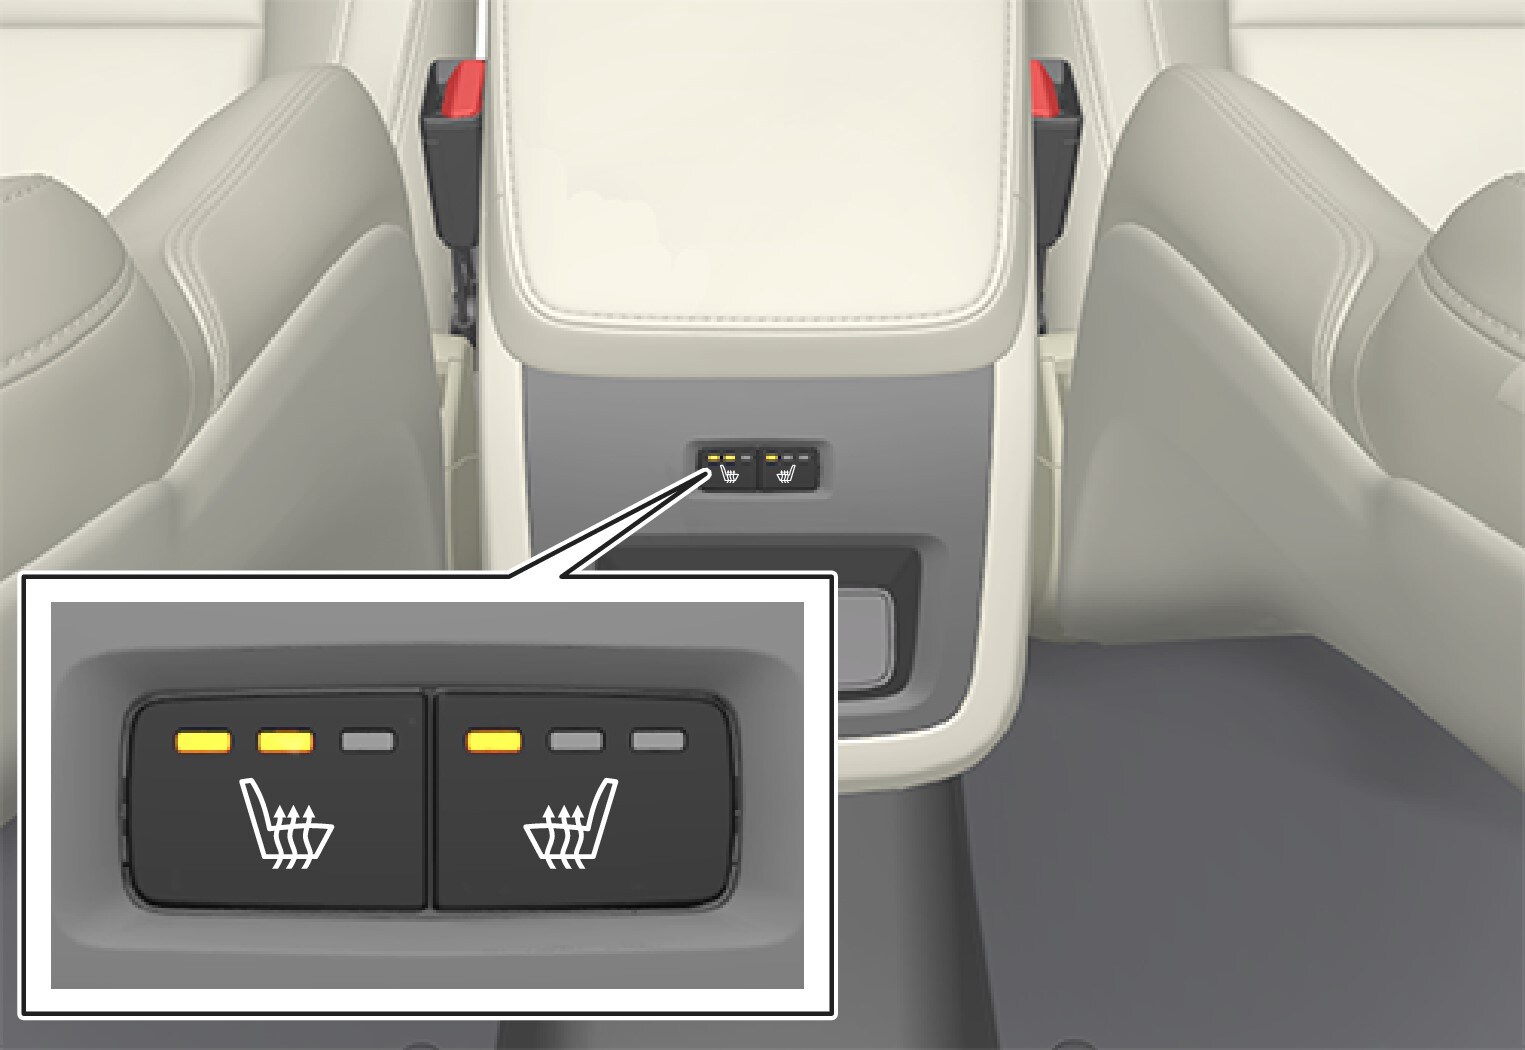 P5-1507–Climate–Rear climate controls physical seat